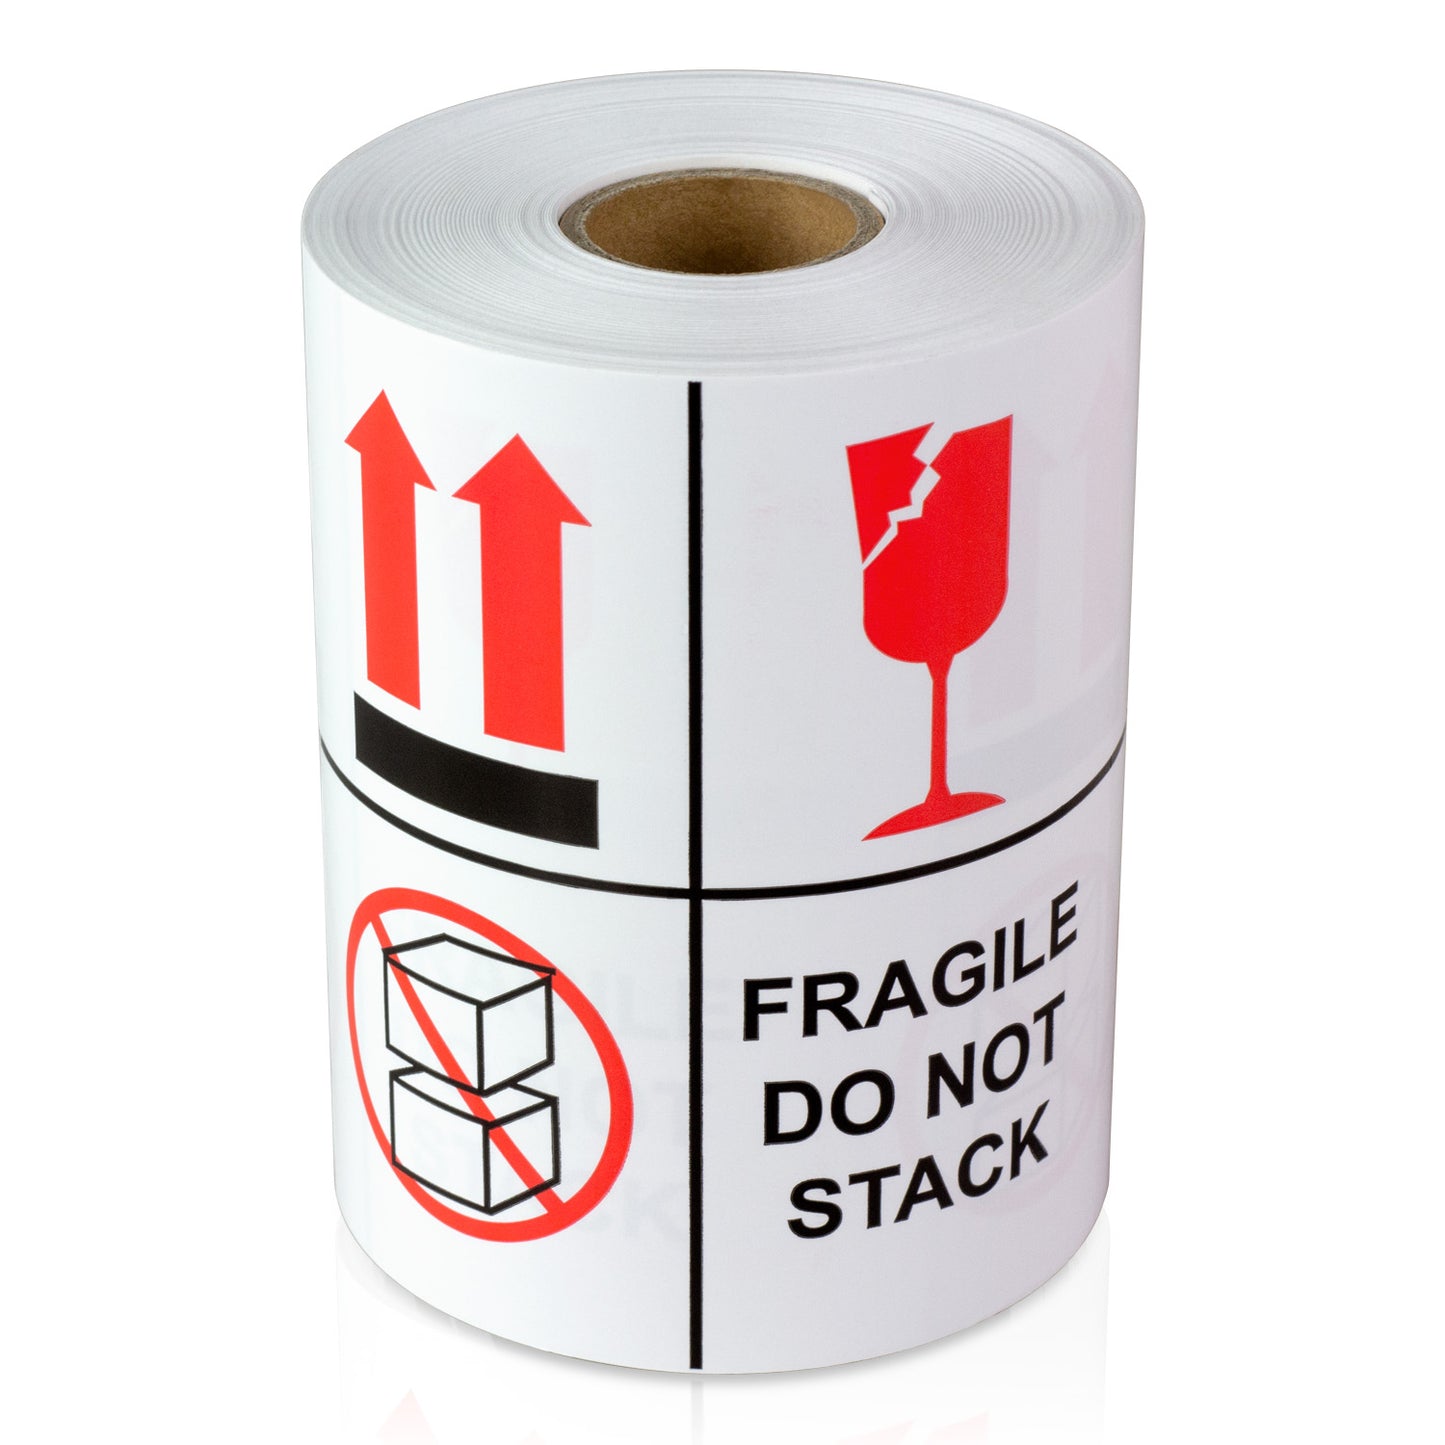 4 x 4 inch | Shipping & Handling: Fragile Stickers / Do Not Stack Stickers